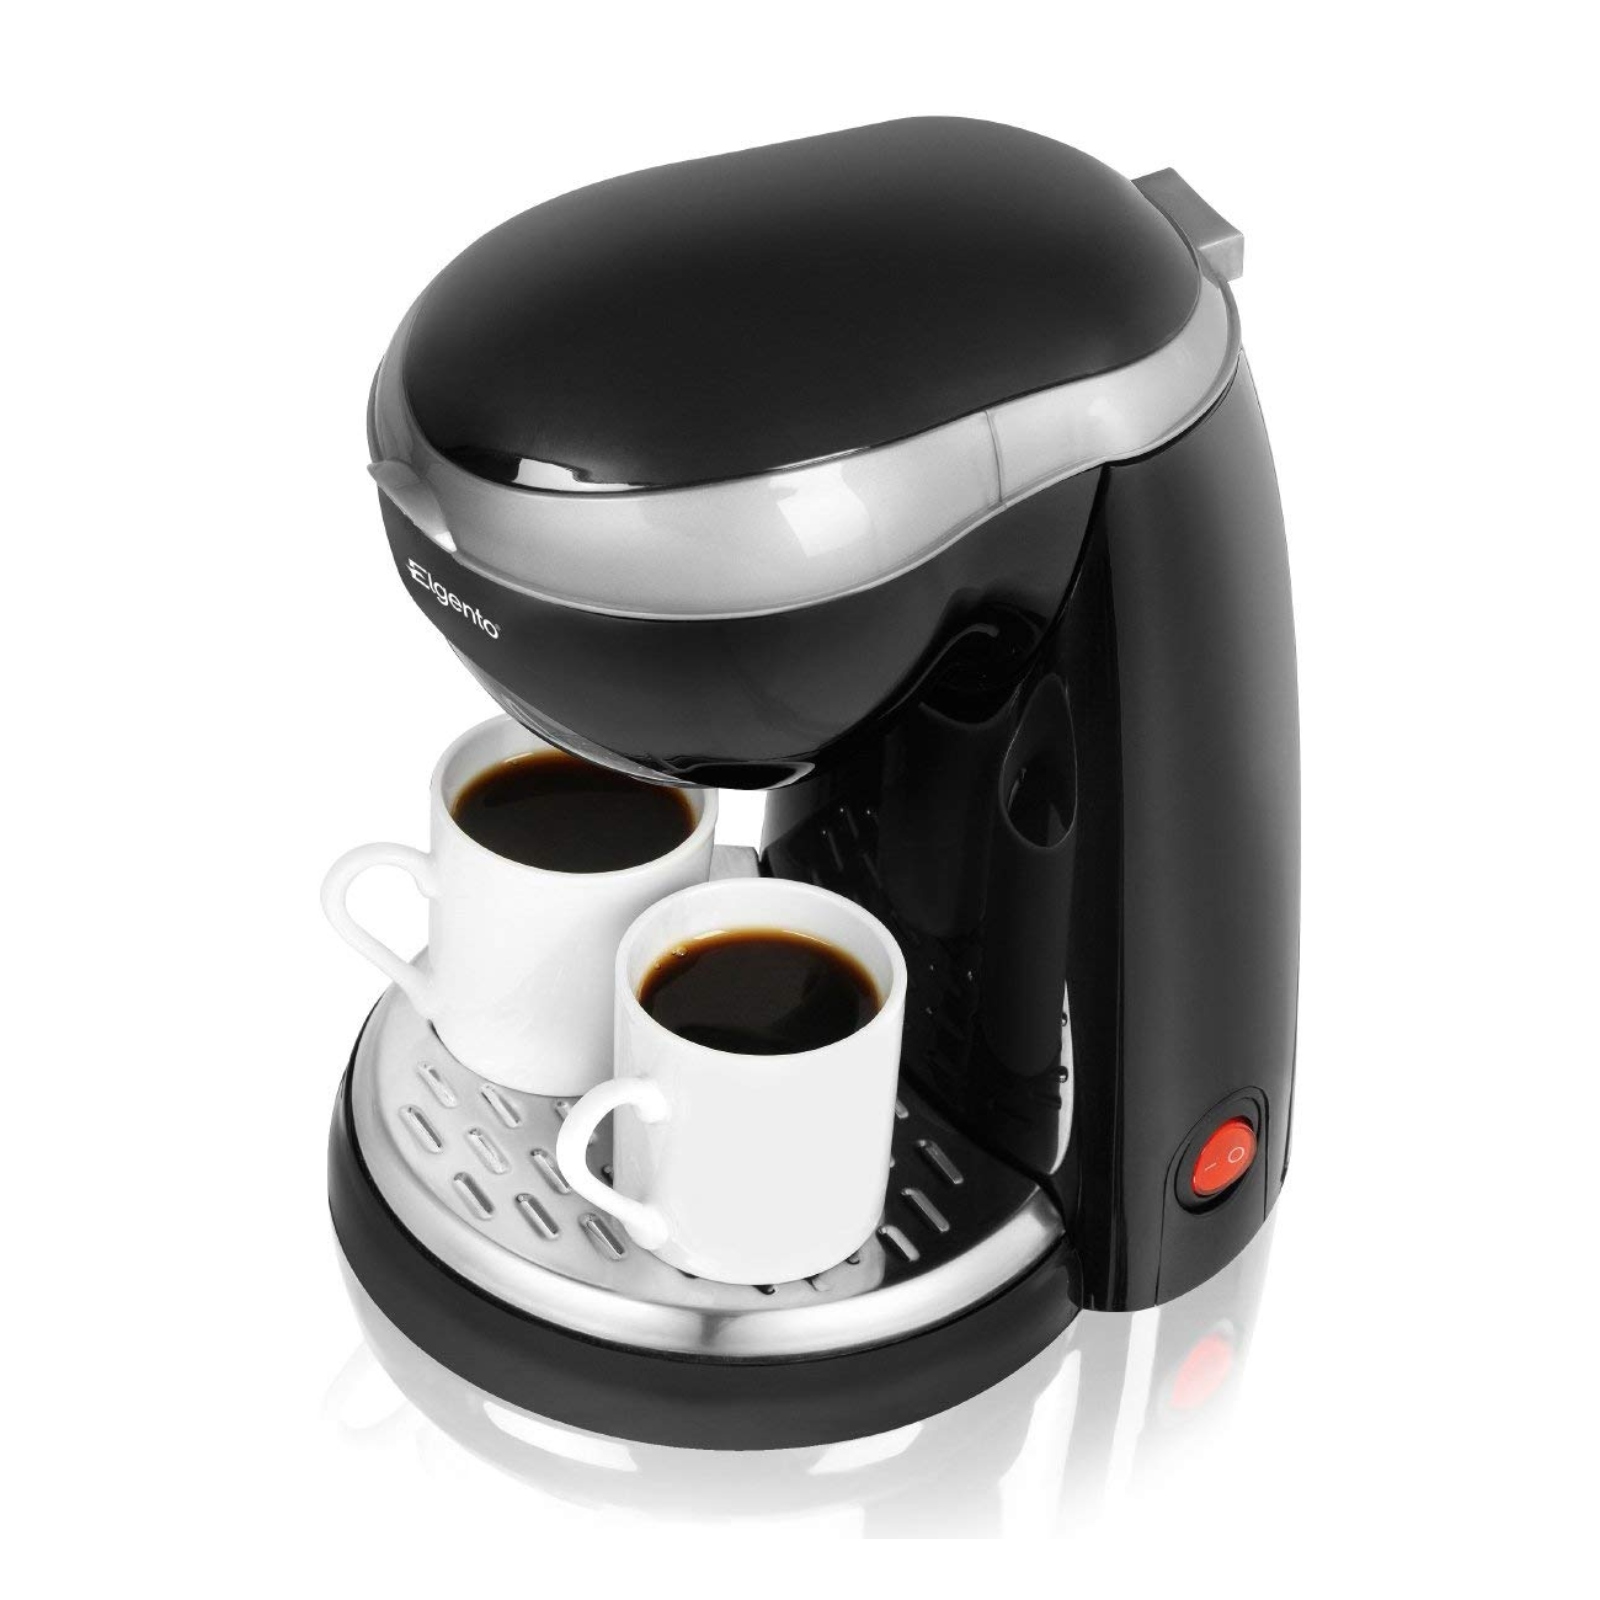 Elgento E13003 2 Cup Coffee Maker - Black - Kettle and Toaster Man